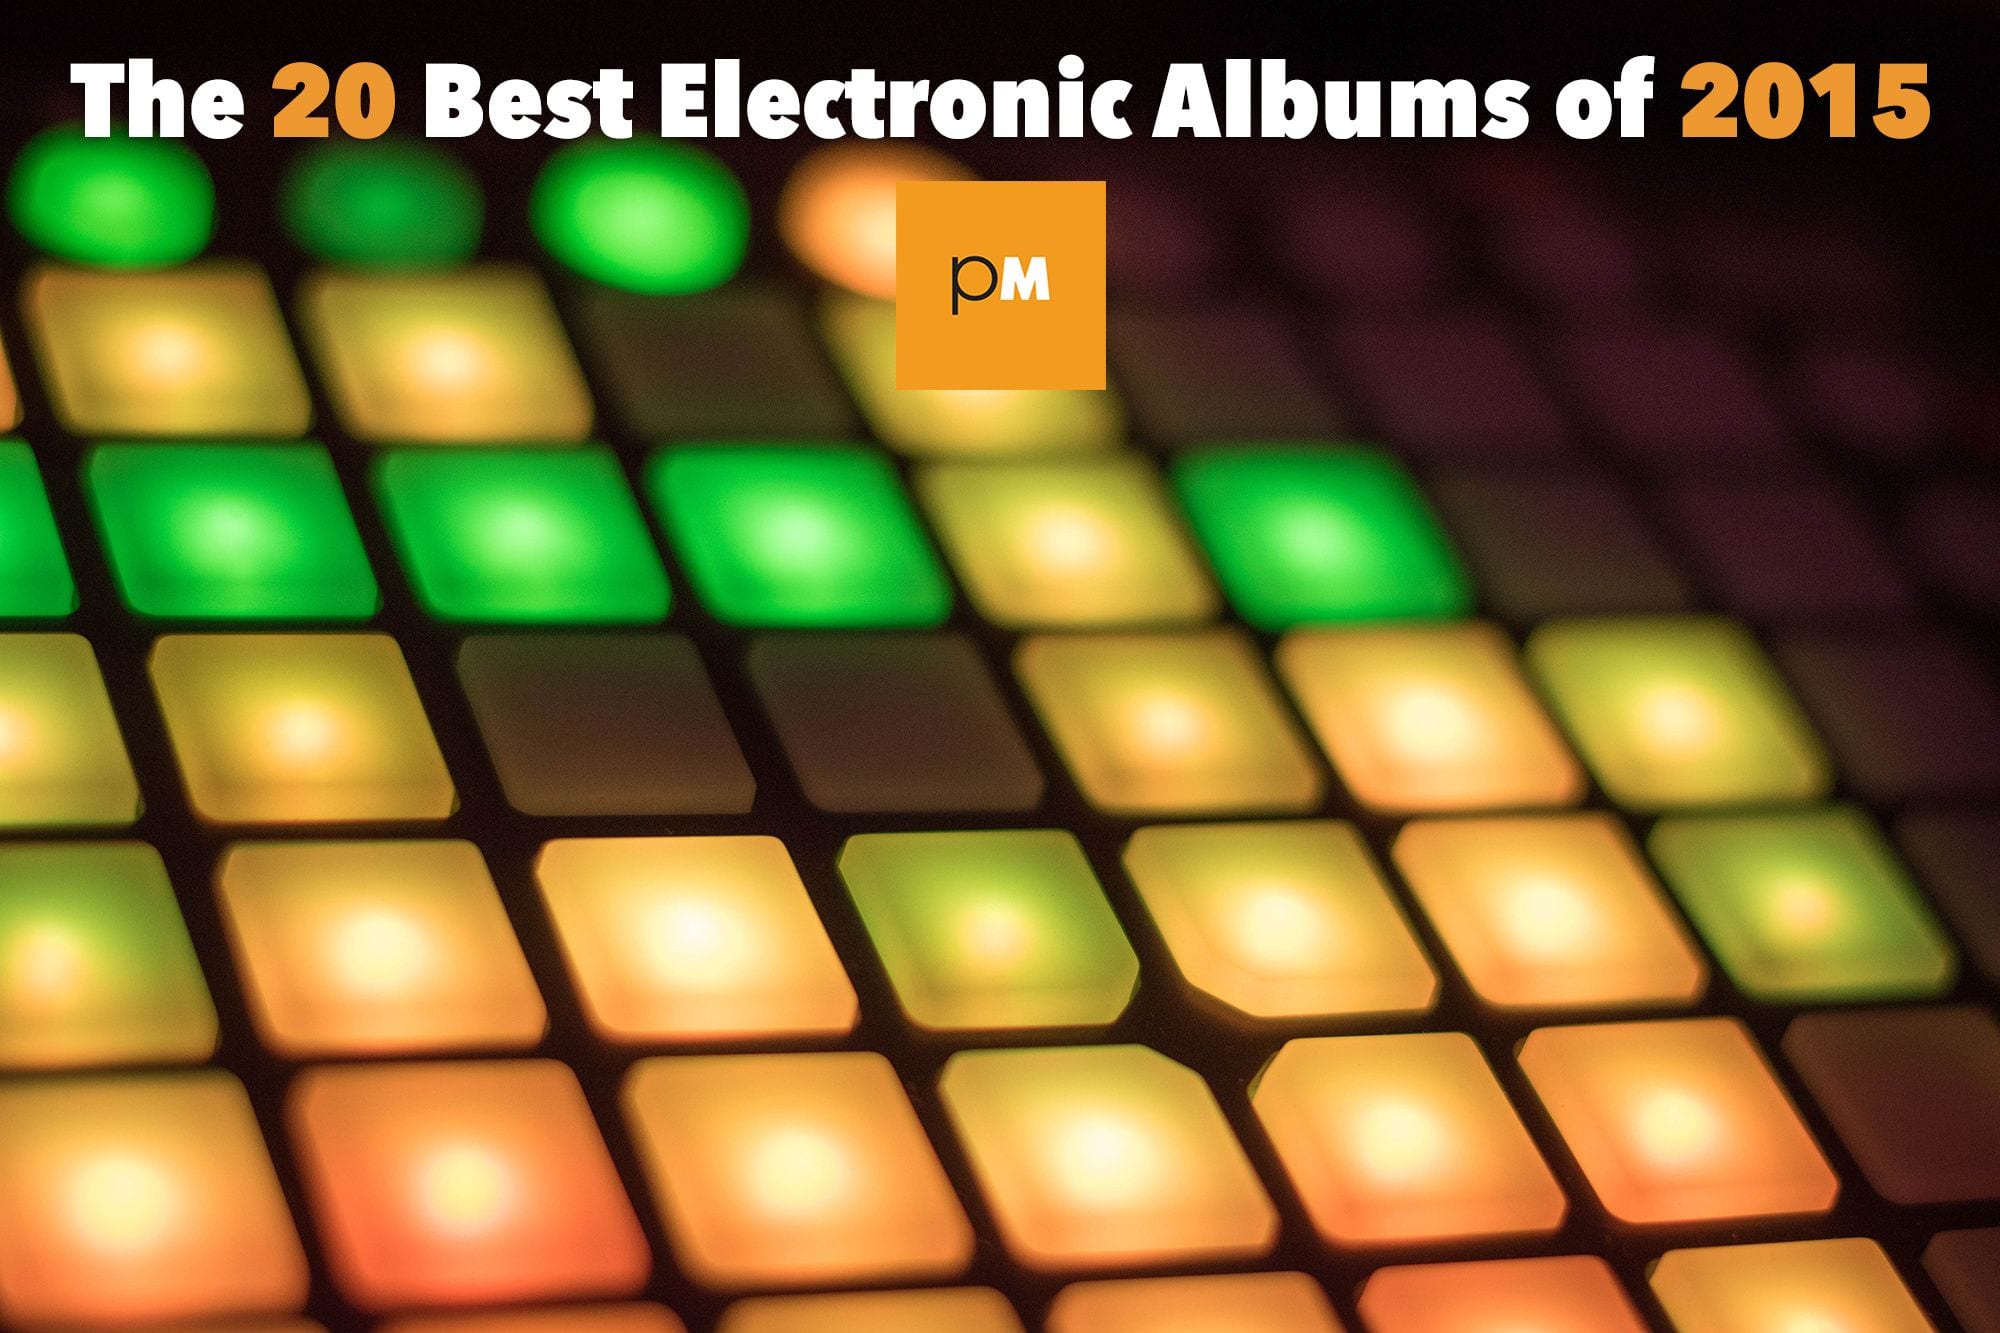 The 20 Best Electronic Albums of 2015